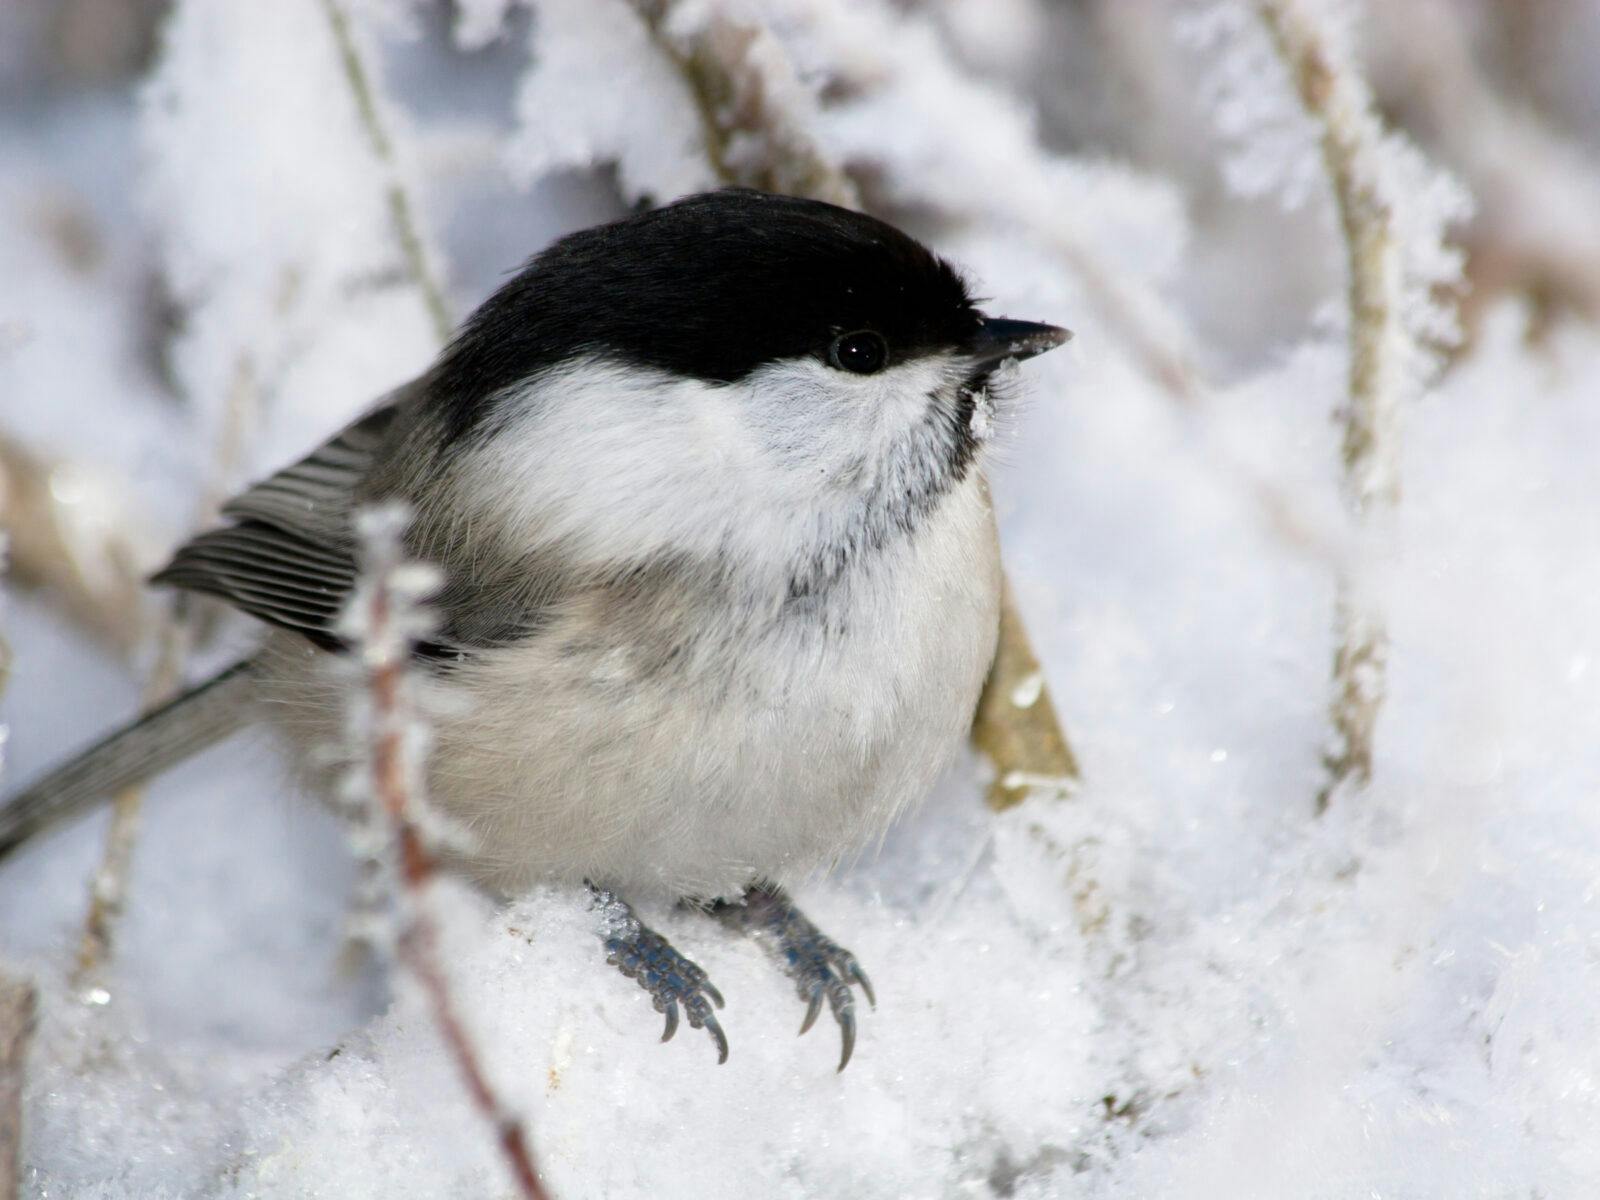 Willow Tit, or Black-capped Chickadee (Parus montanus) is in the Wild Nature. Russia, the Ryazan region, Pronsky area, village Denisovo.